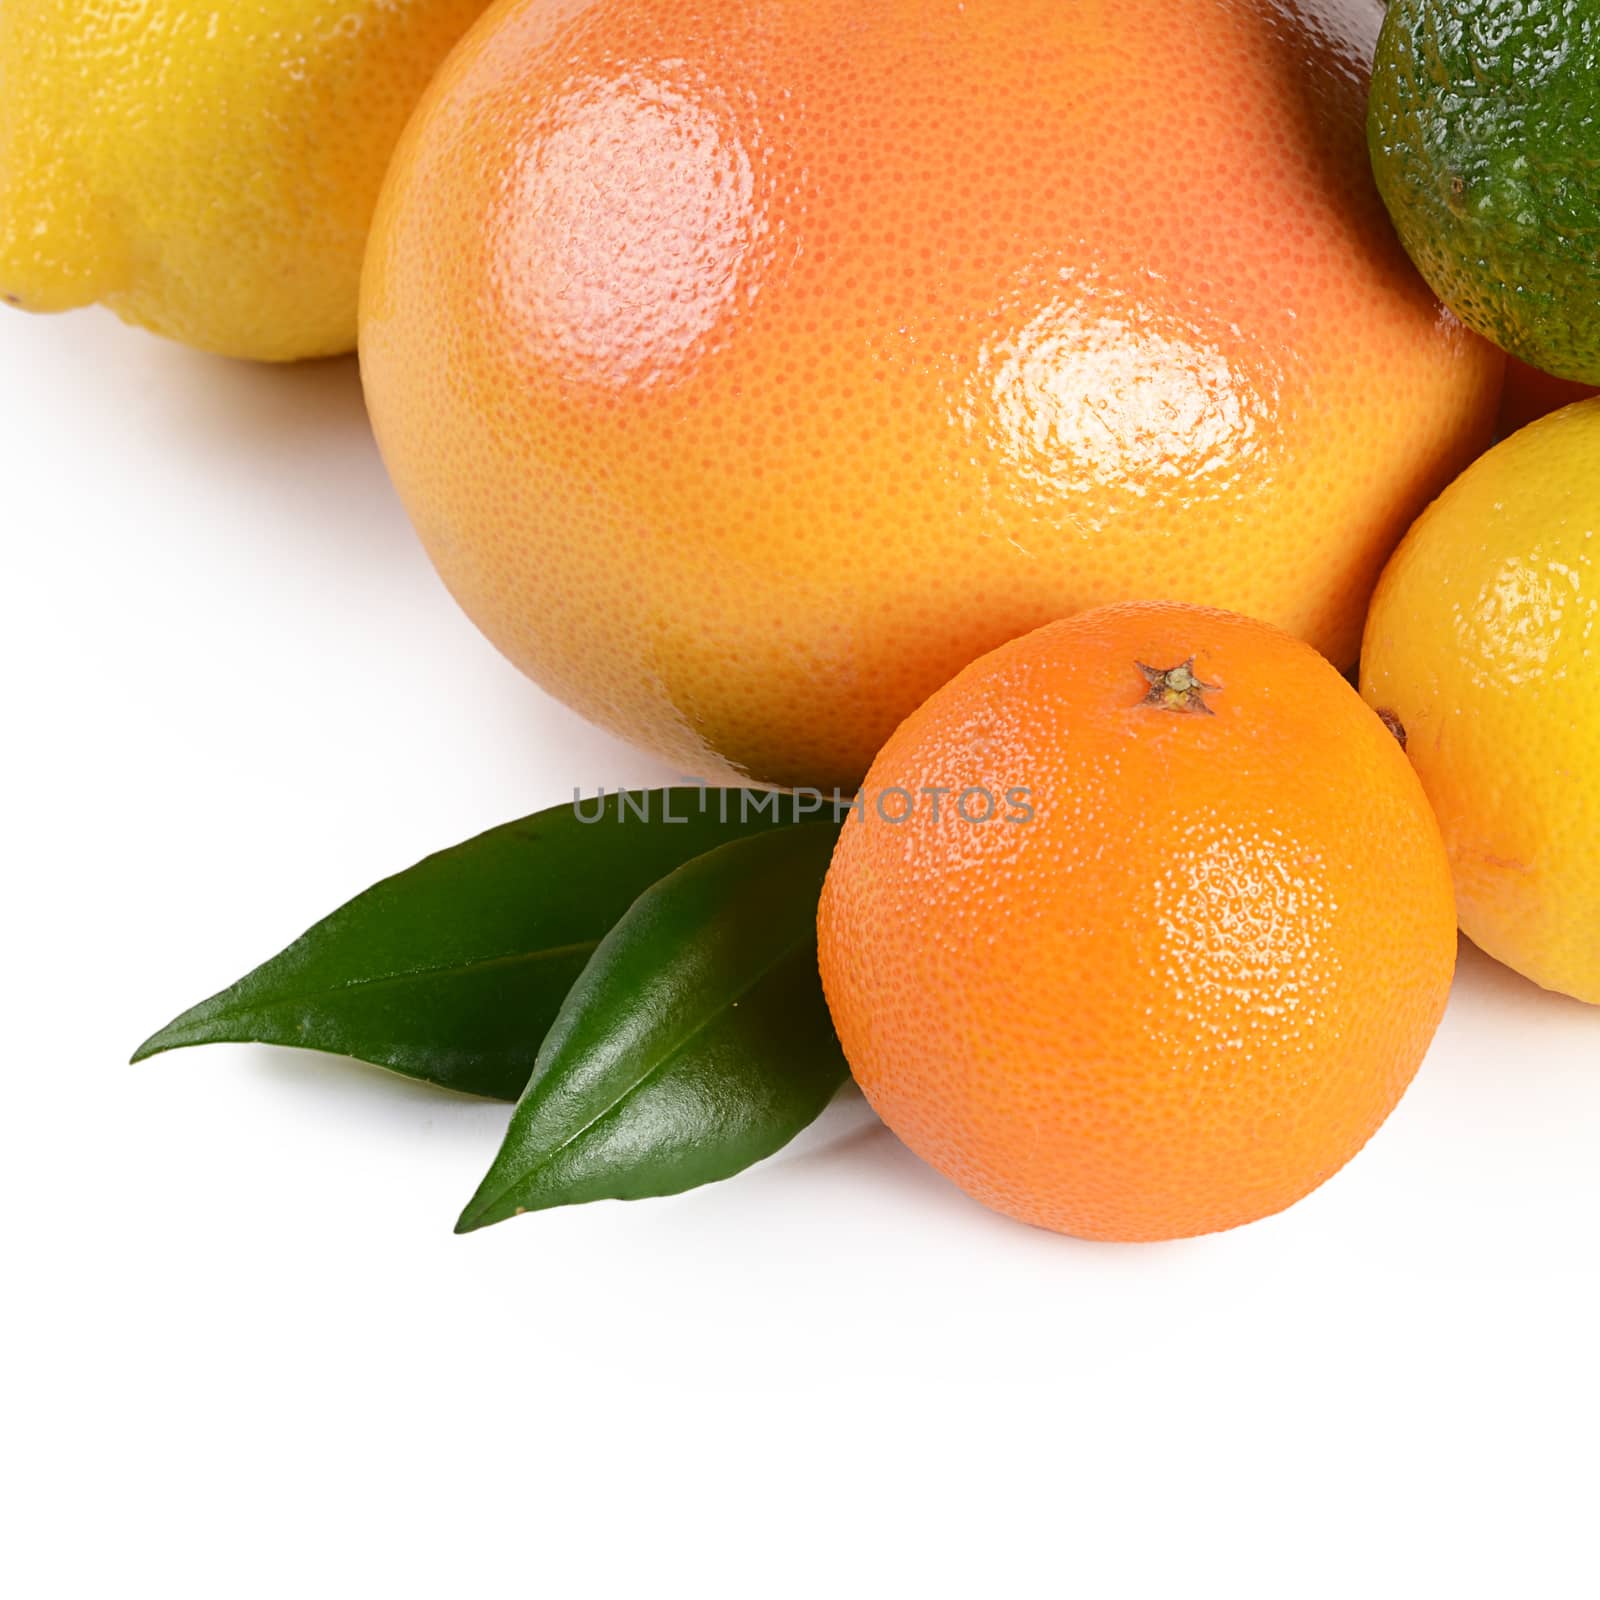 Allsorts from citrus isolated on white background